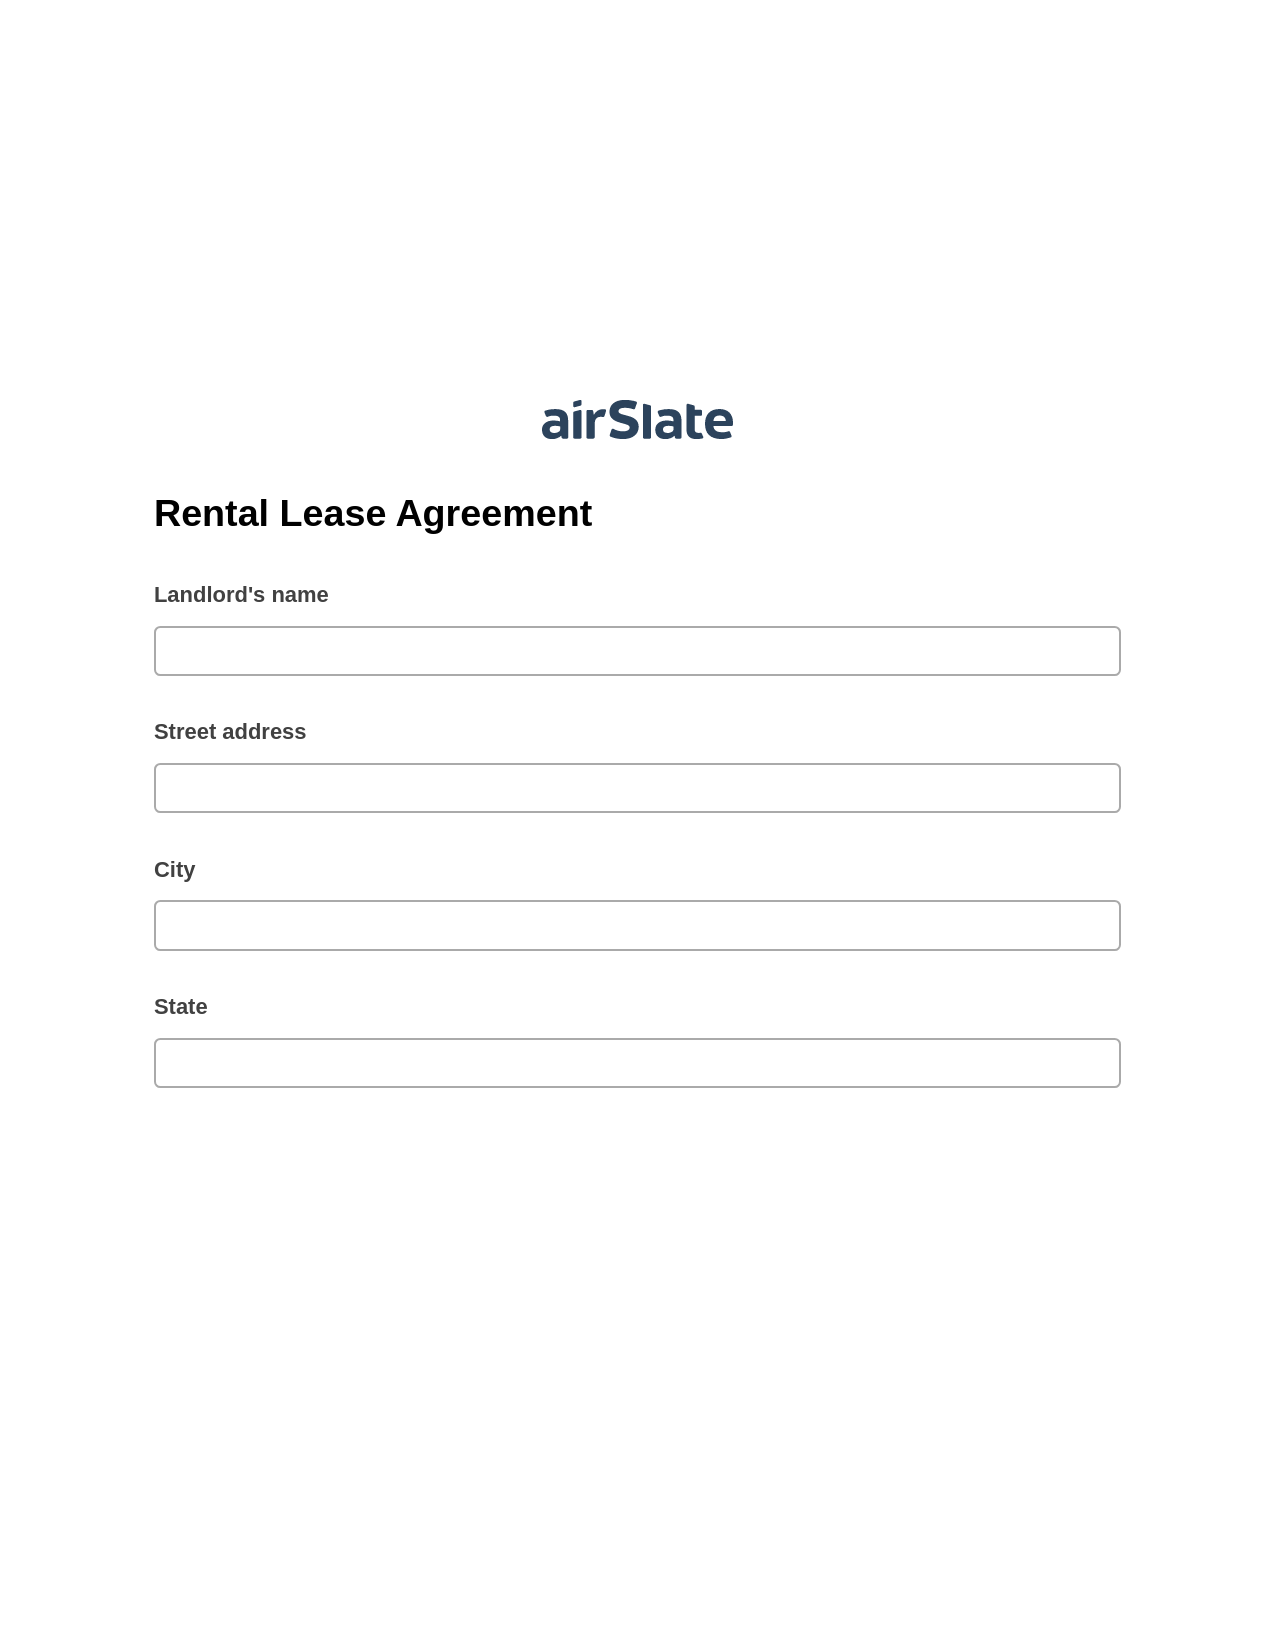 Rental Lease Agreement Pre-fill from MySQL Dropdown Options Bot, Create NetSuite Records Bot, Slack Two-Way Binding Bot